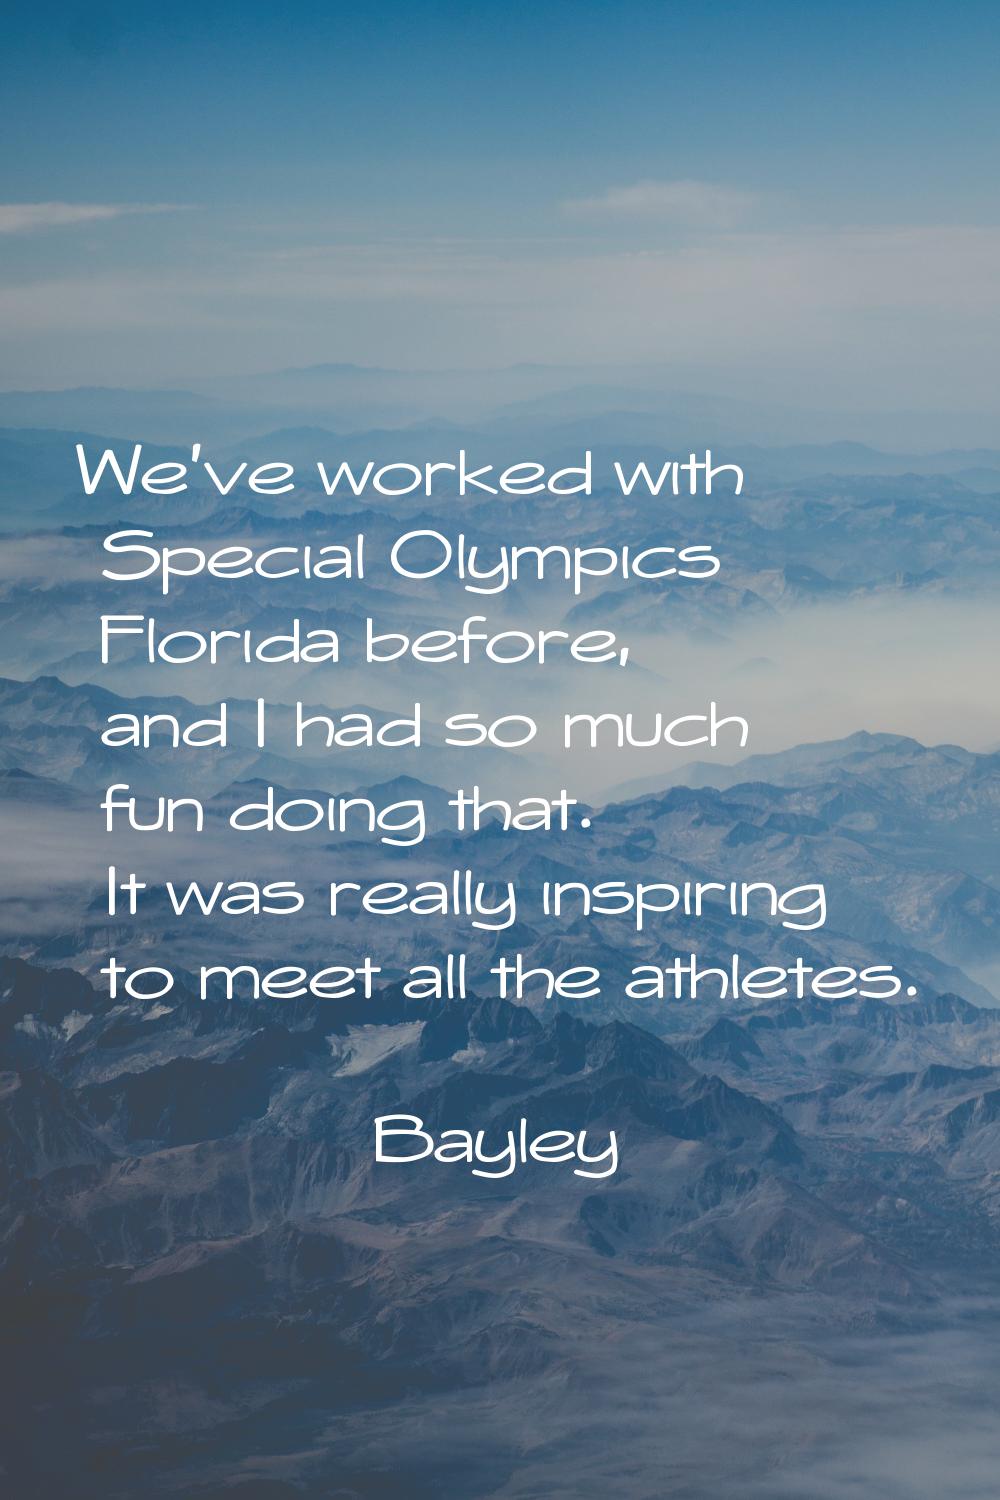 We've worked with Special Olympics Florida before, and I had so much fun doing that. It was really 